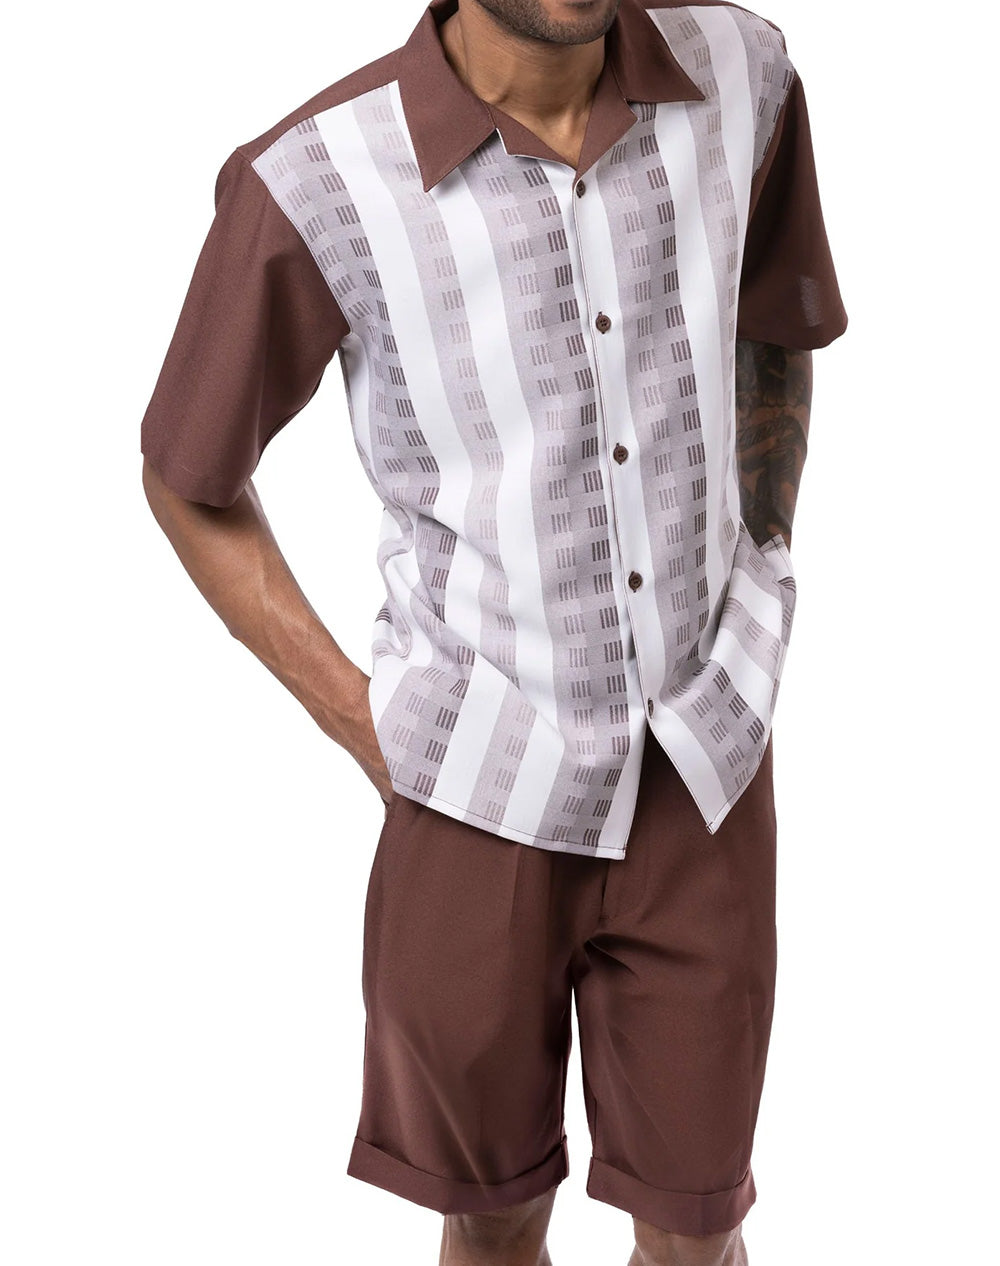 Brown Color Striped Walking Suit 2 Piece Short Sleeve Set with Shorts